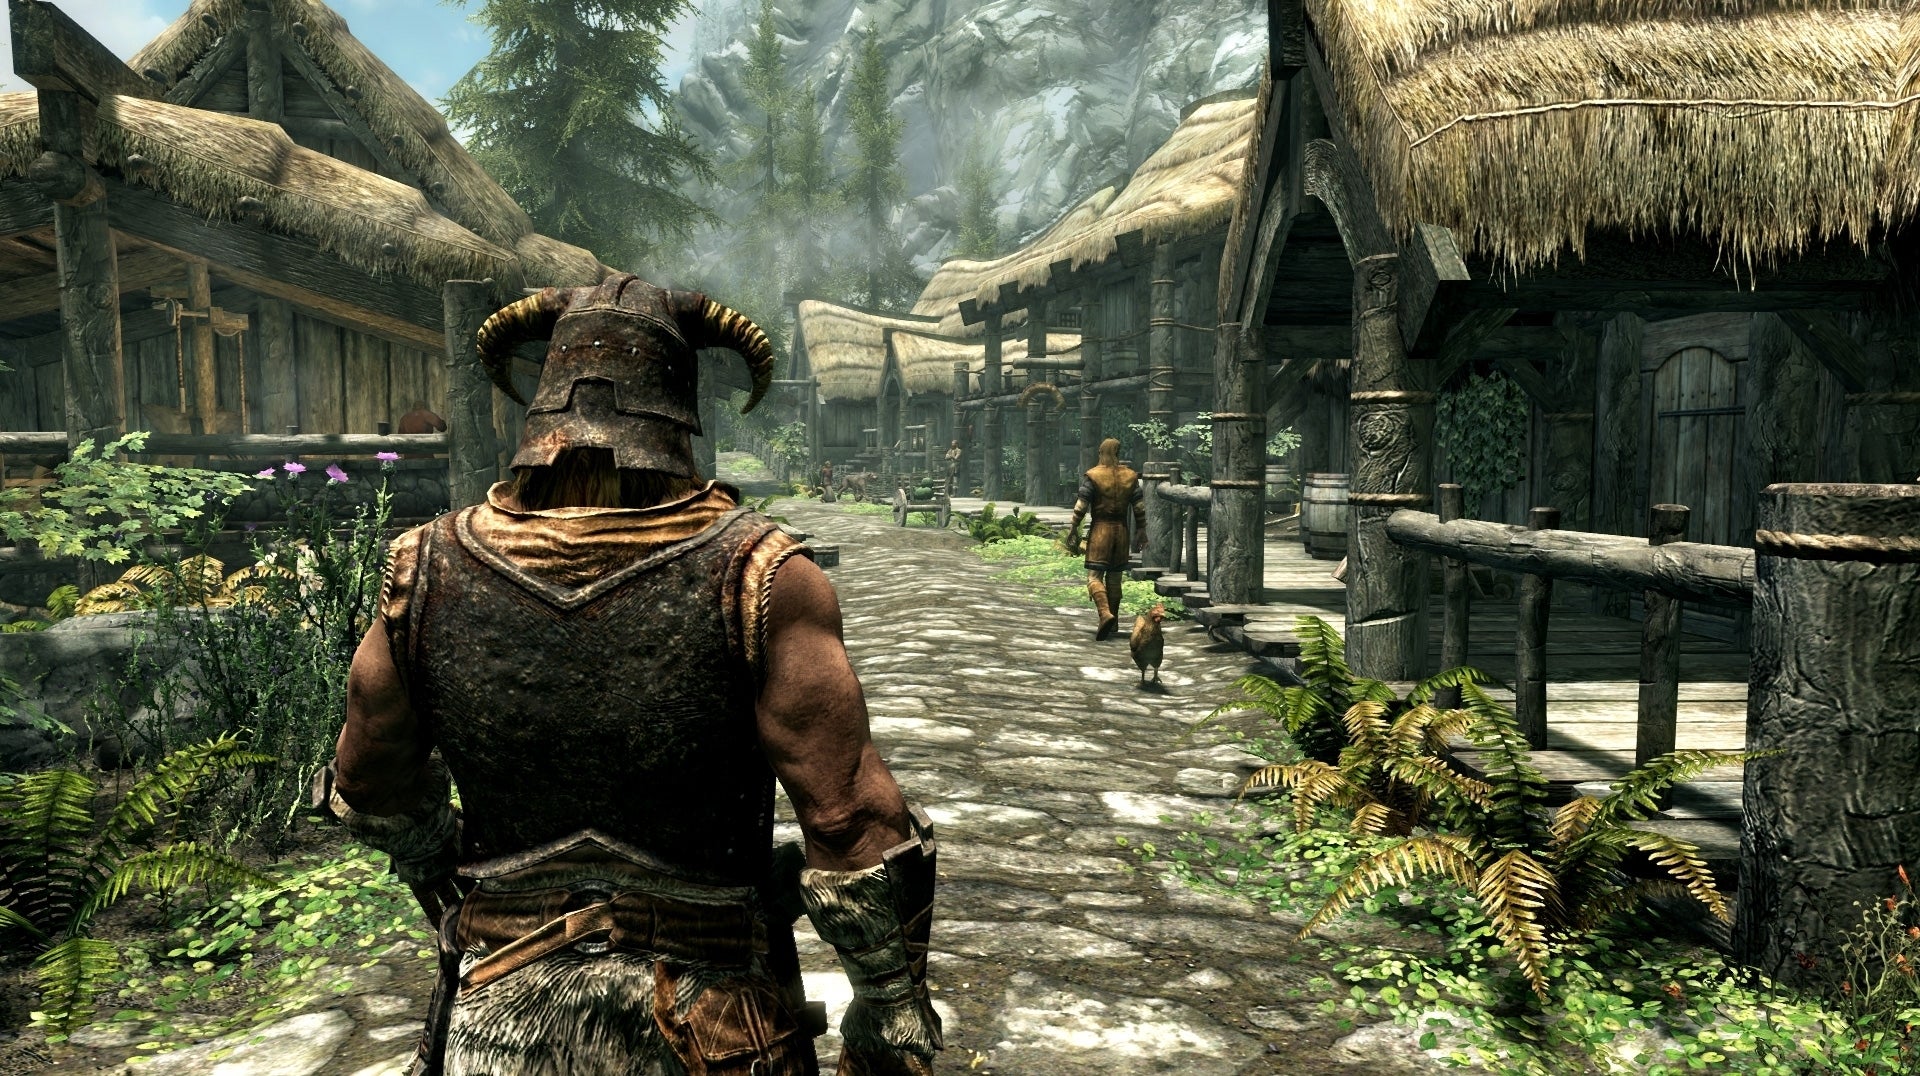 Image for Skyrim Together code-stealing controversy sends shockwaves around the modding community